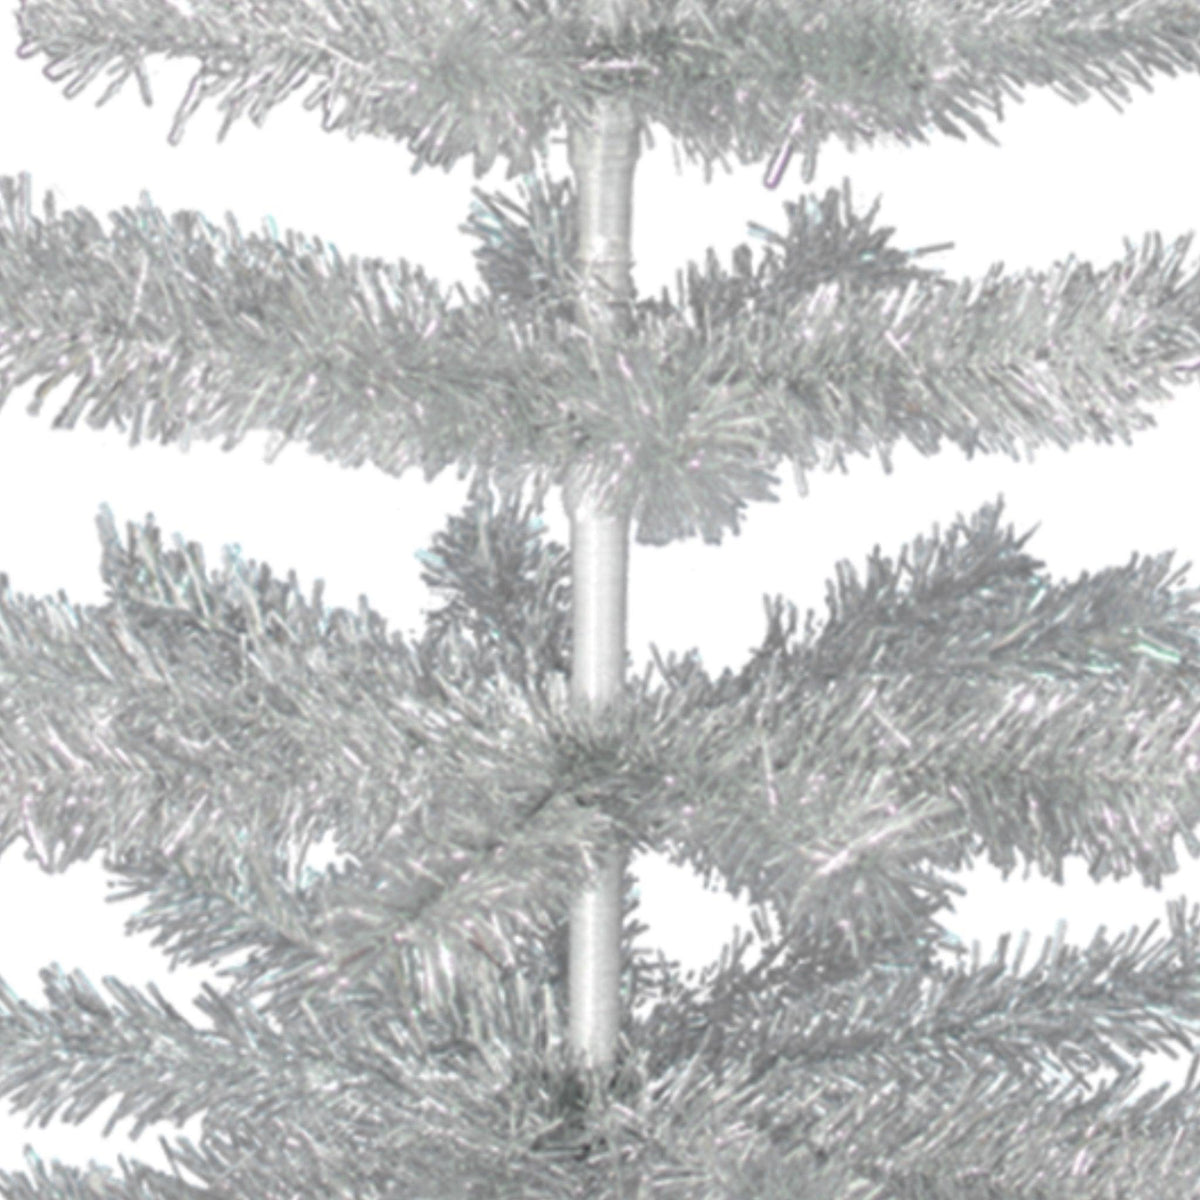 Middle section of the 5FT Tall Silver Tinsel Christmas Tree from leedisplay